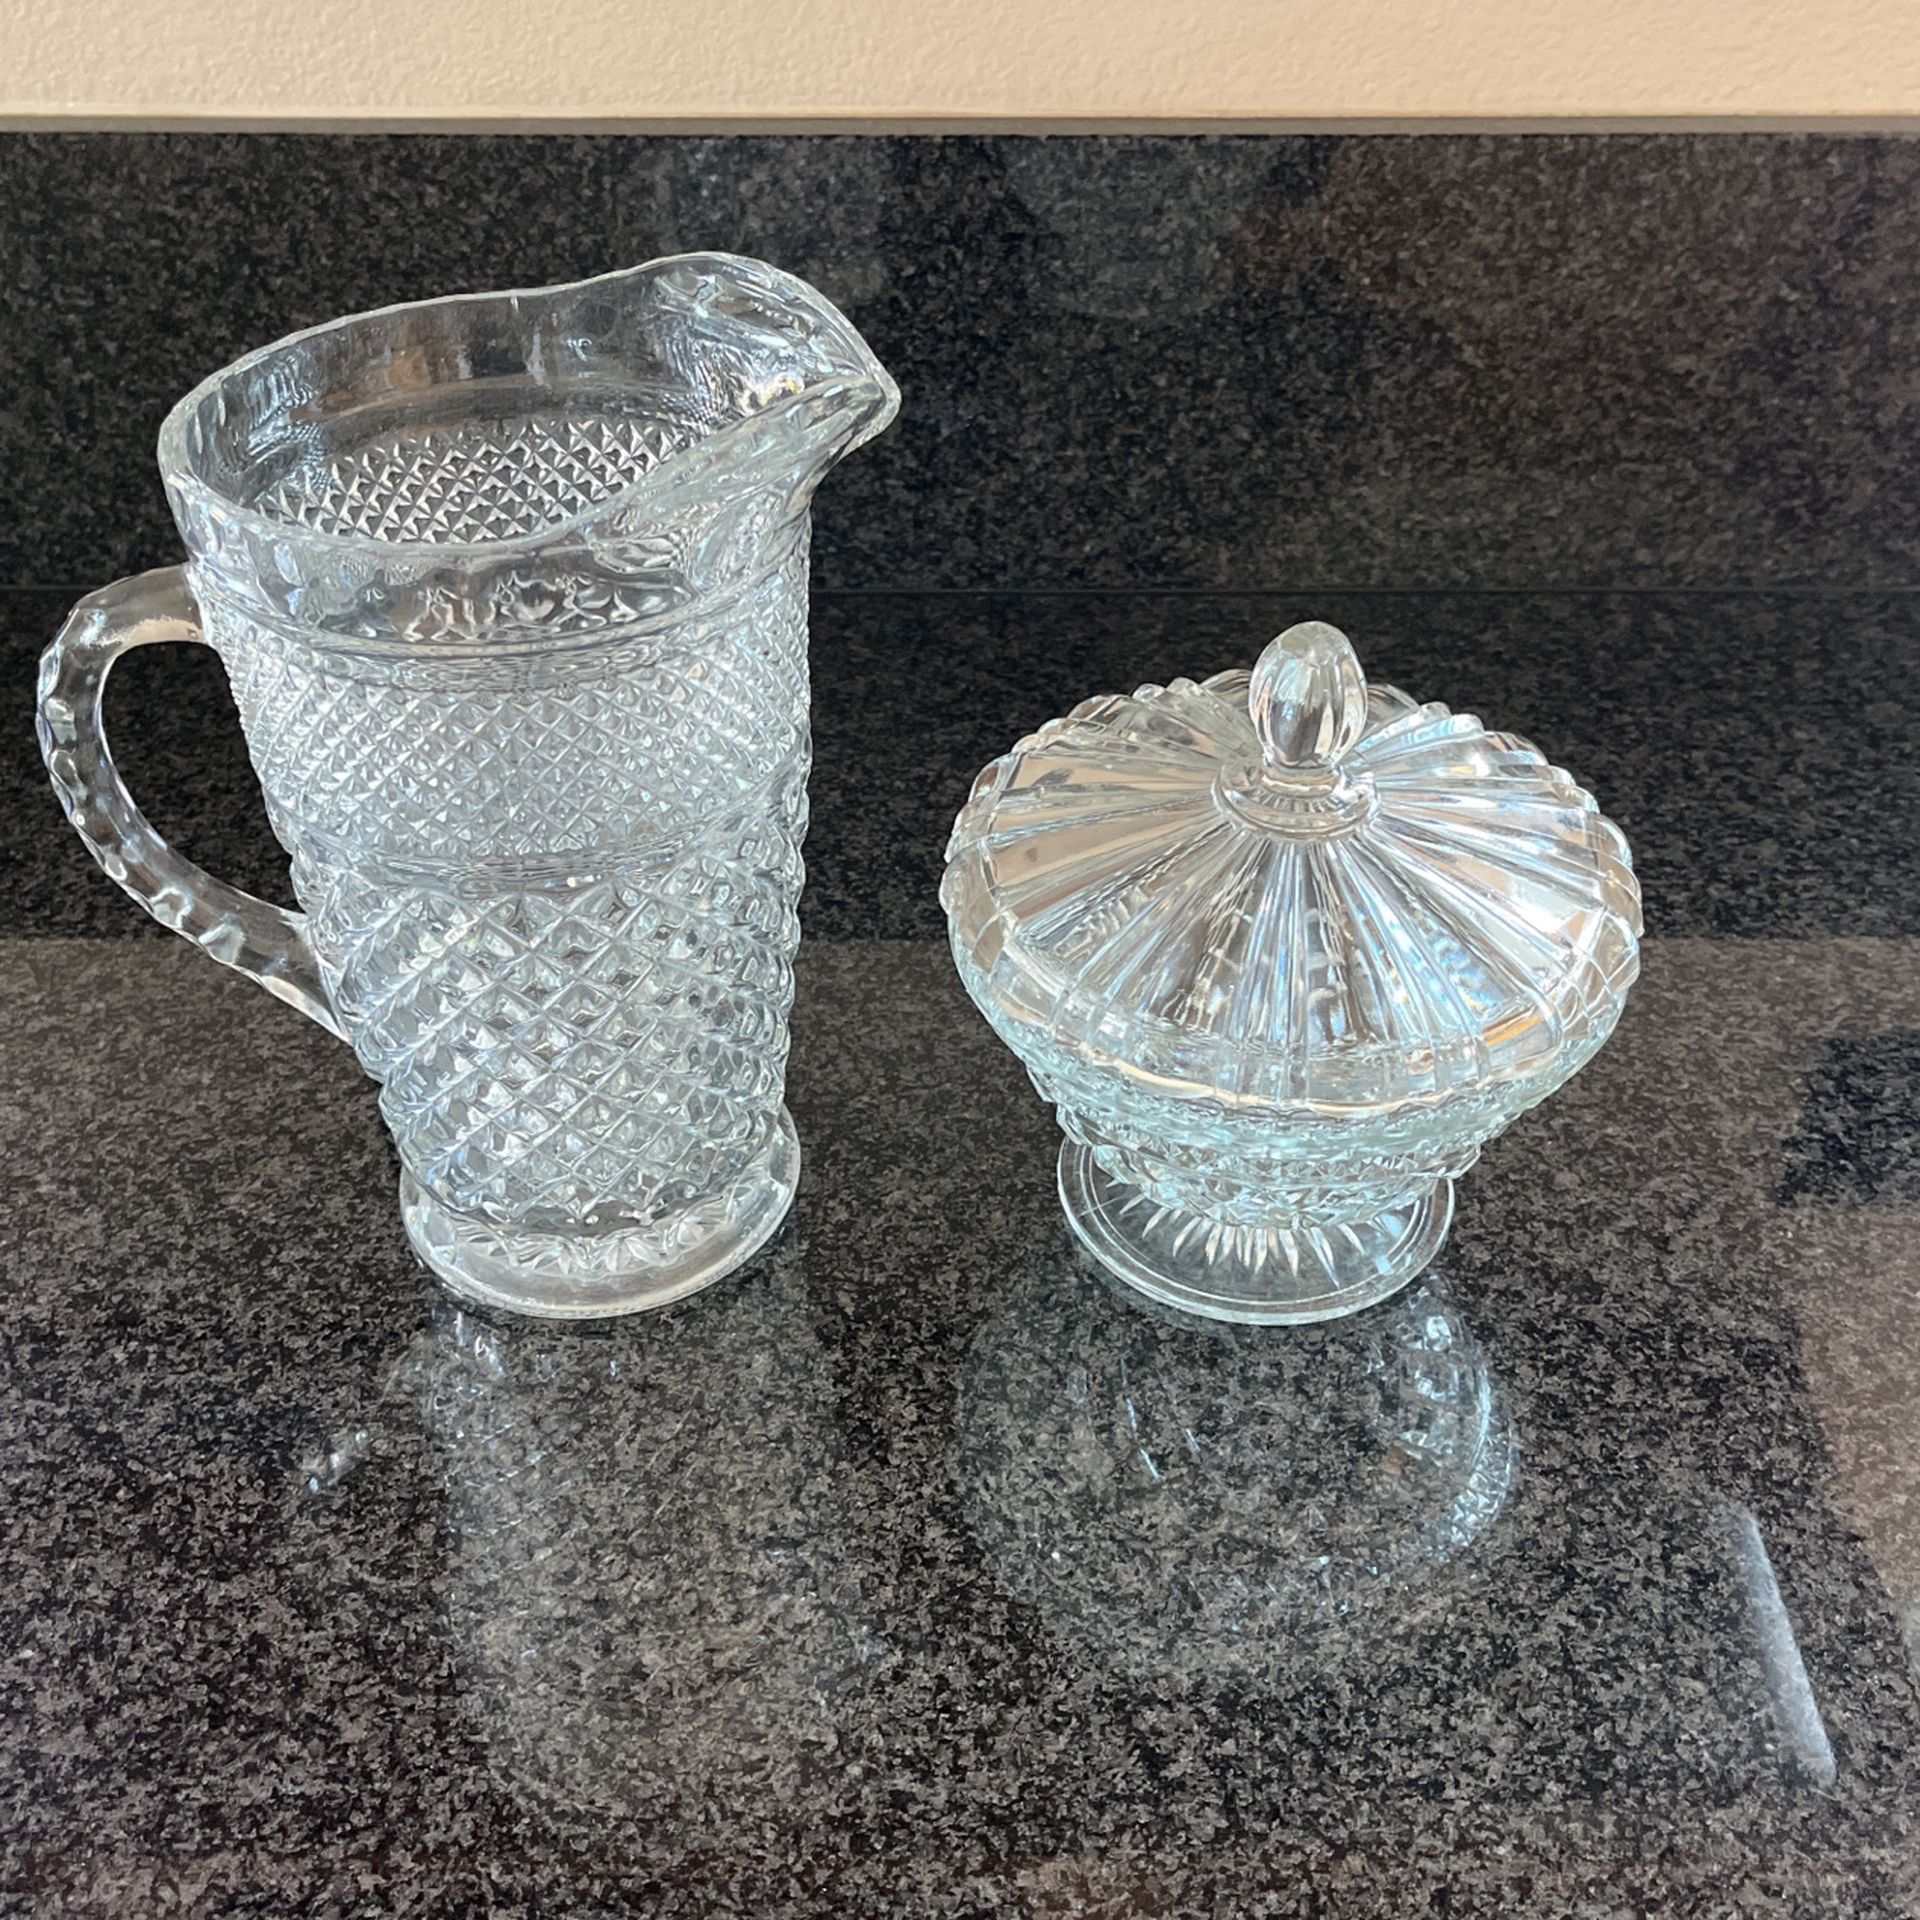 Antique Cut Glass Pitcher And Large Candy Dish With Lid